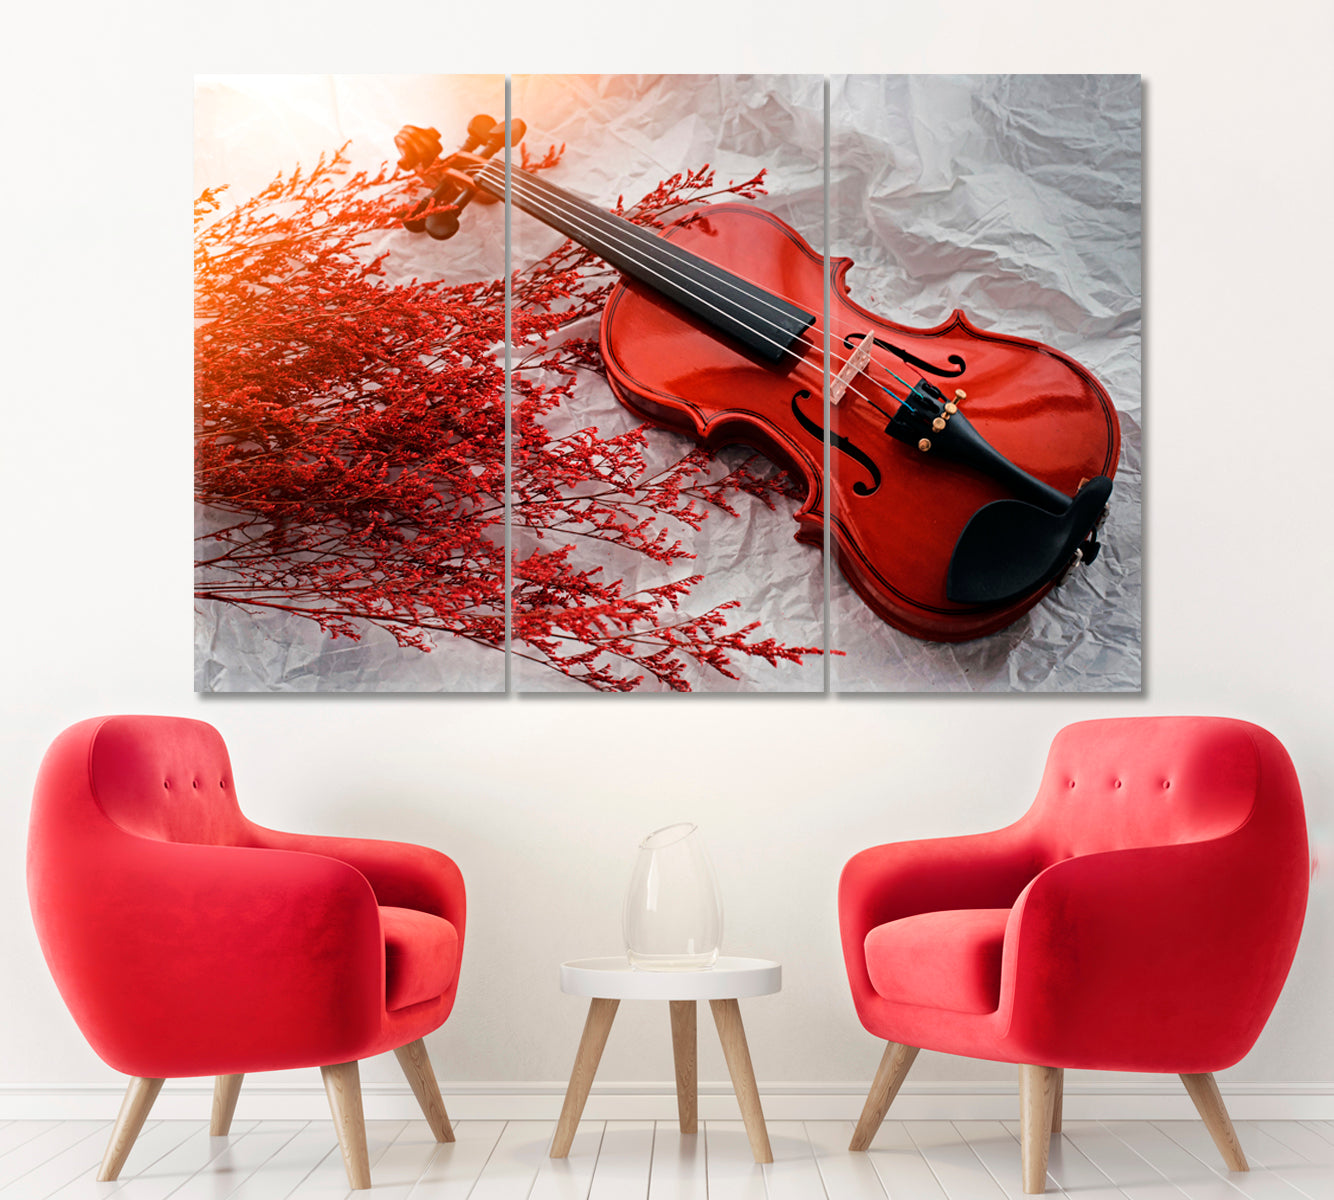 Violin with Dried Flowers Canvas Print ArtLexy 3 Panels 36"x24" inches 